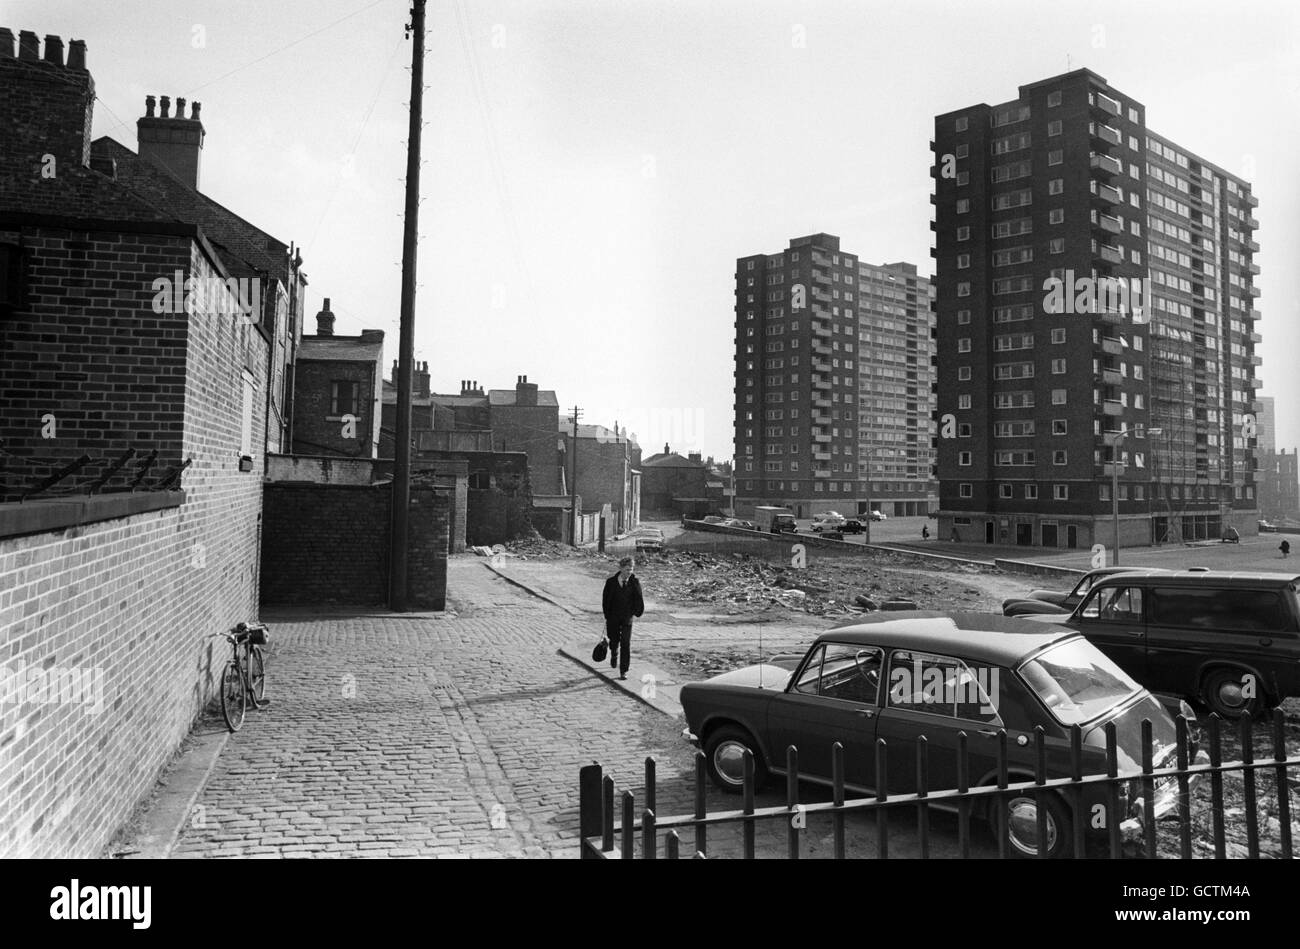 Fast disappearing is the squalid area of narrow cobbled streets, called locally 'Hanky Park', in Salford, Lancashire, which provided the background for the famous novel, 'Love on the Dole' by Walter Greenwood, who lived there. The tiny two-up, two-down houses have been bulldozed to make way for new blocks of skyscraper flats like those shown here towering above the remnants of the past. Stock Photo